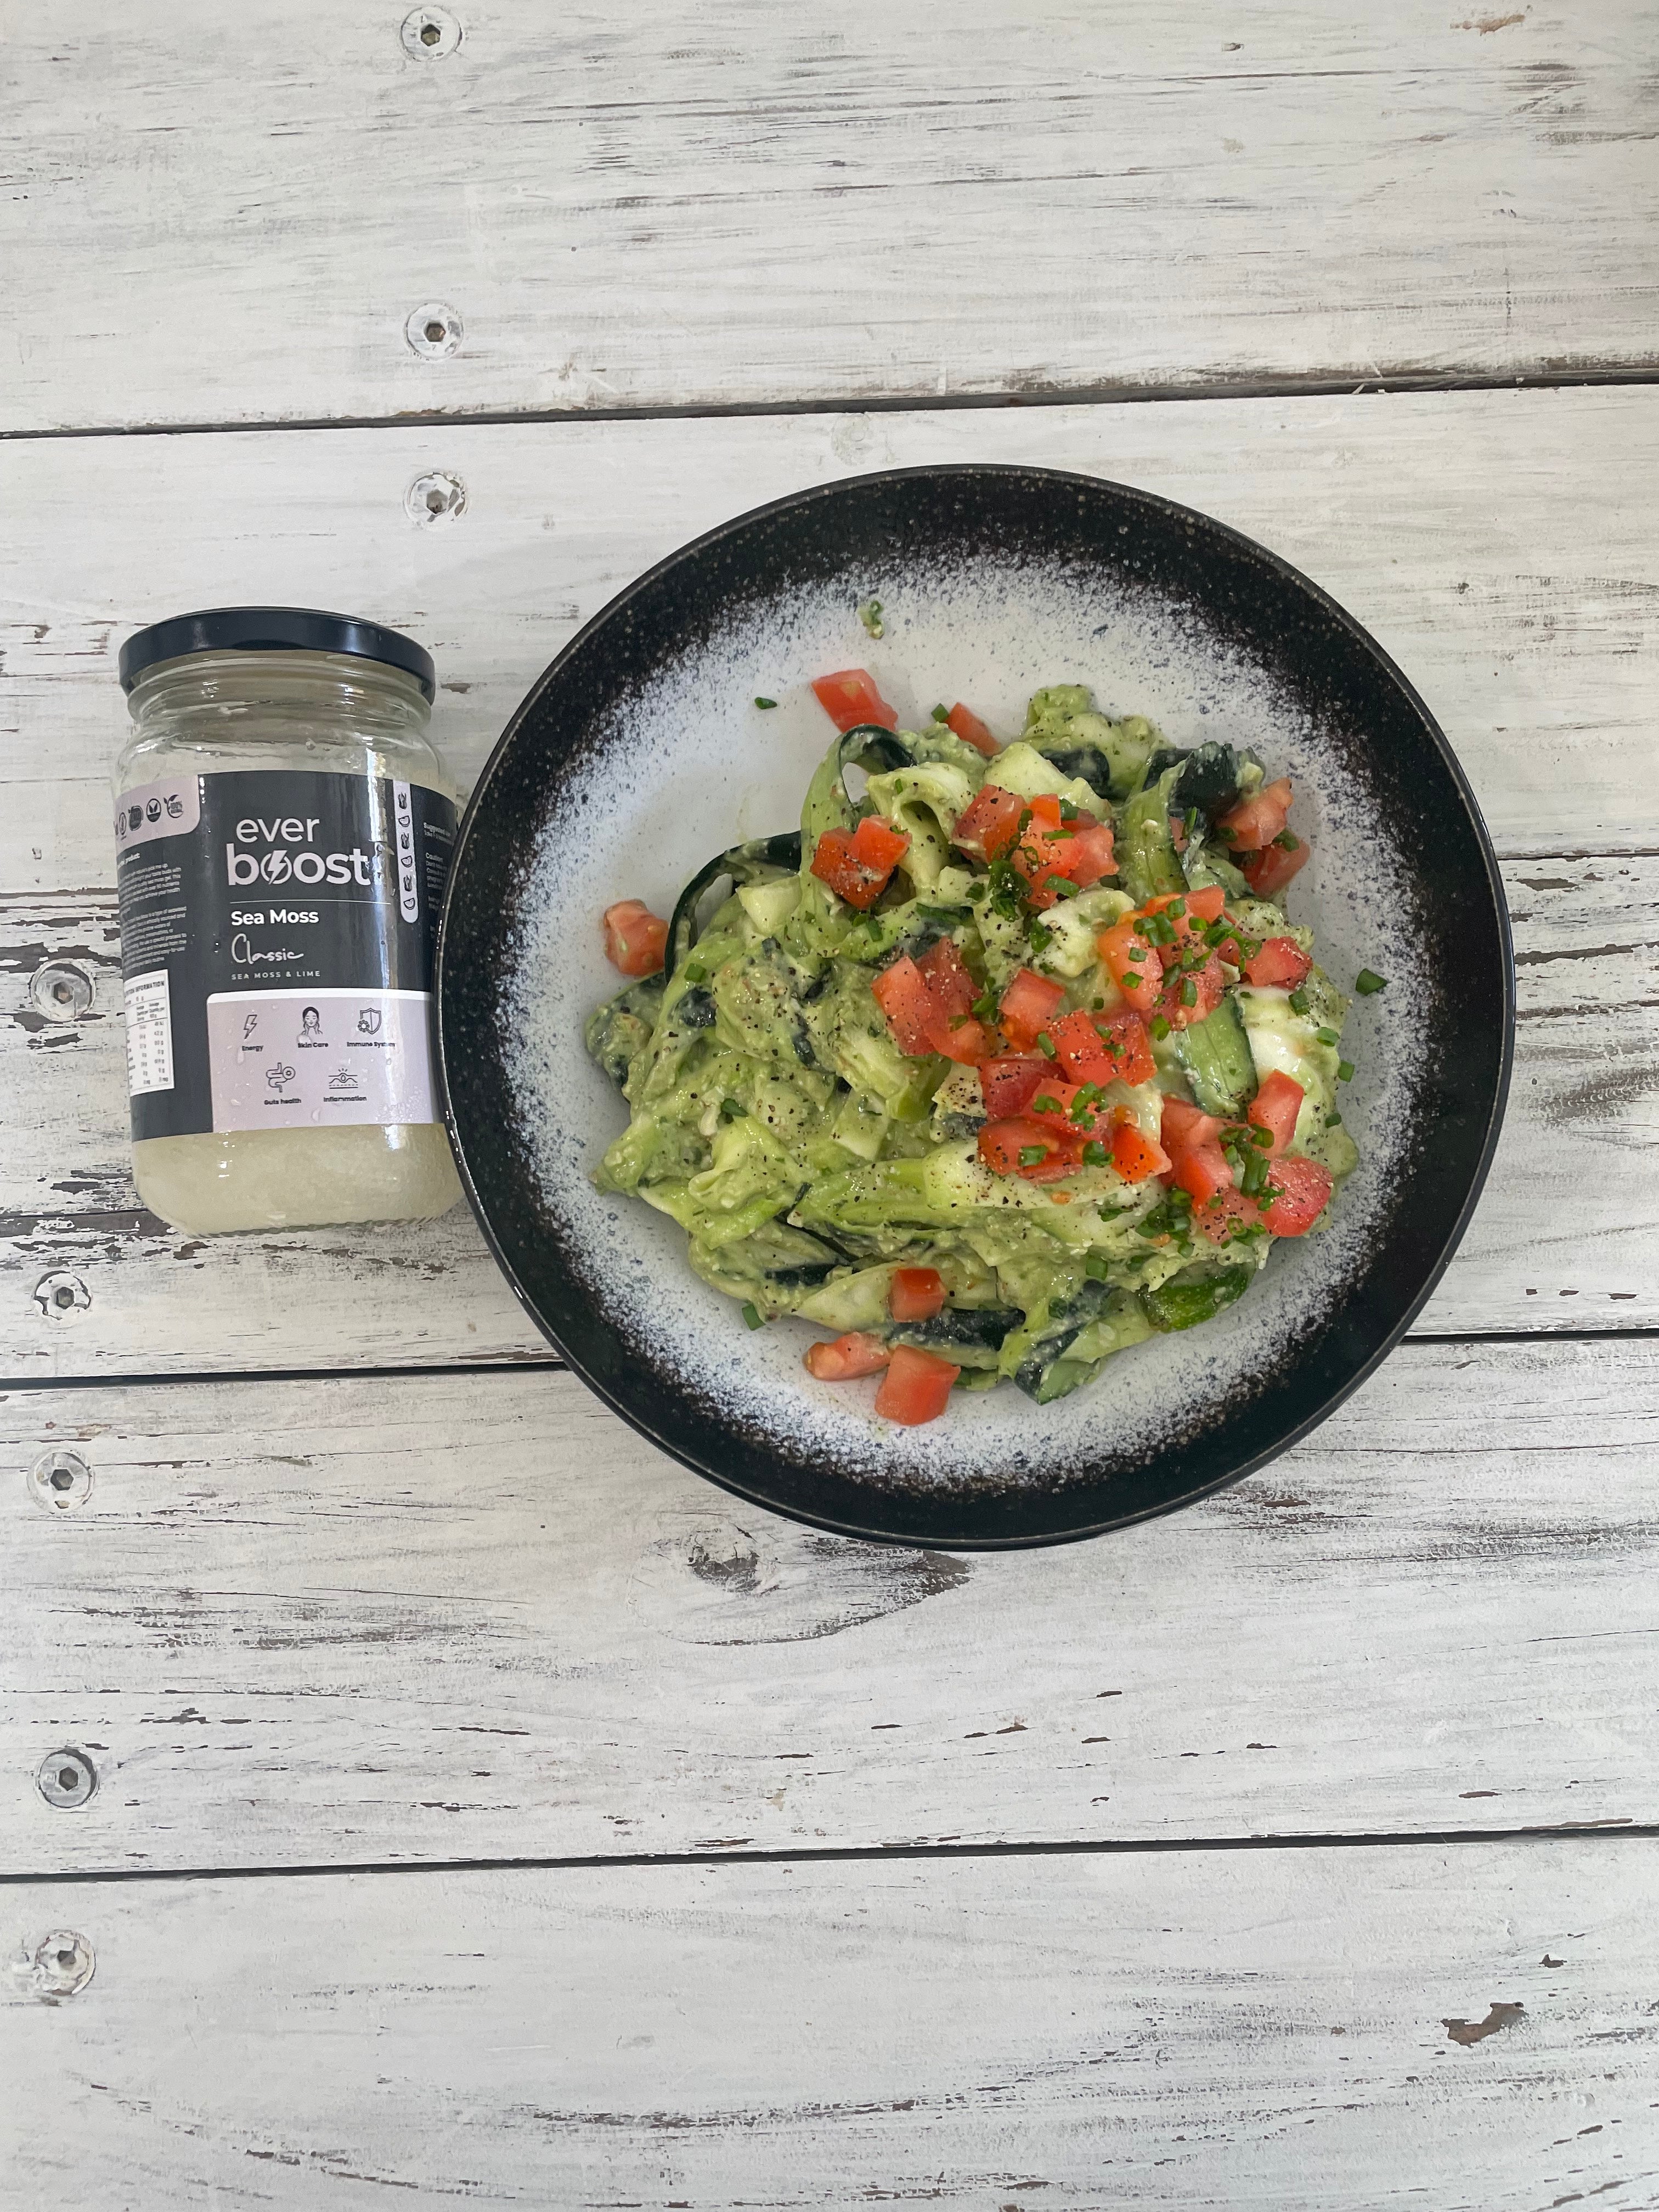 Vegan Zucchini Noodles with Avocado Sauce and Everboost Classic Sea Moss Gel